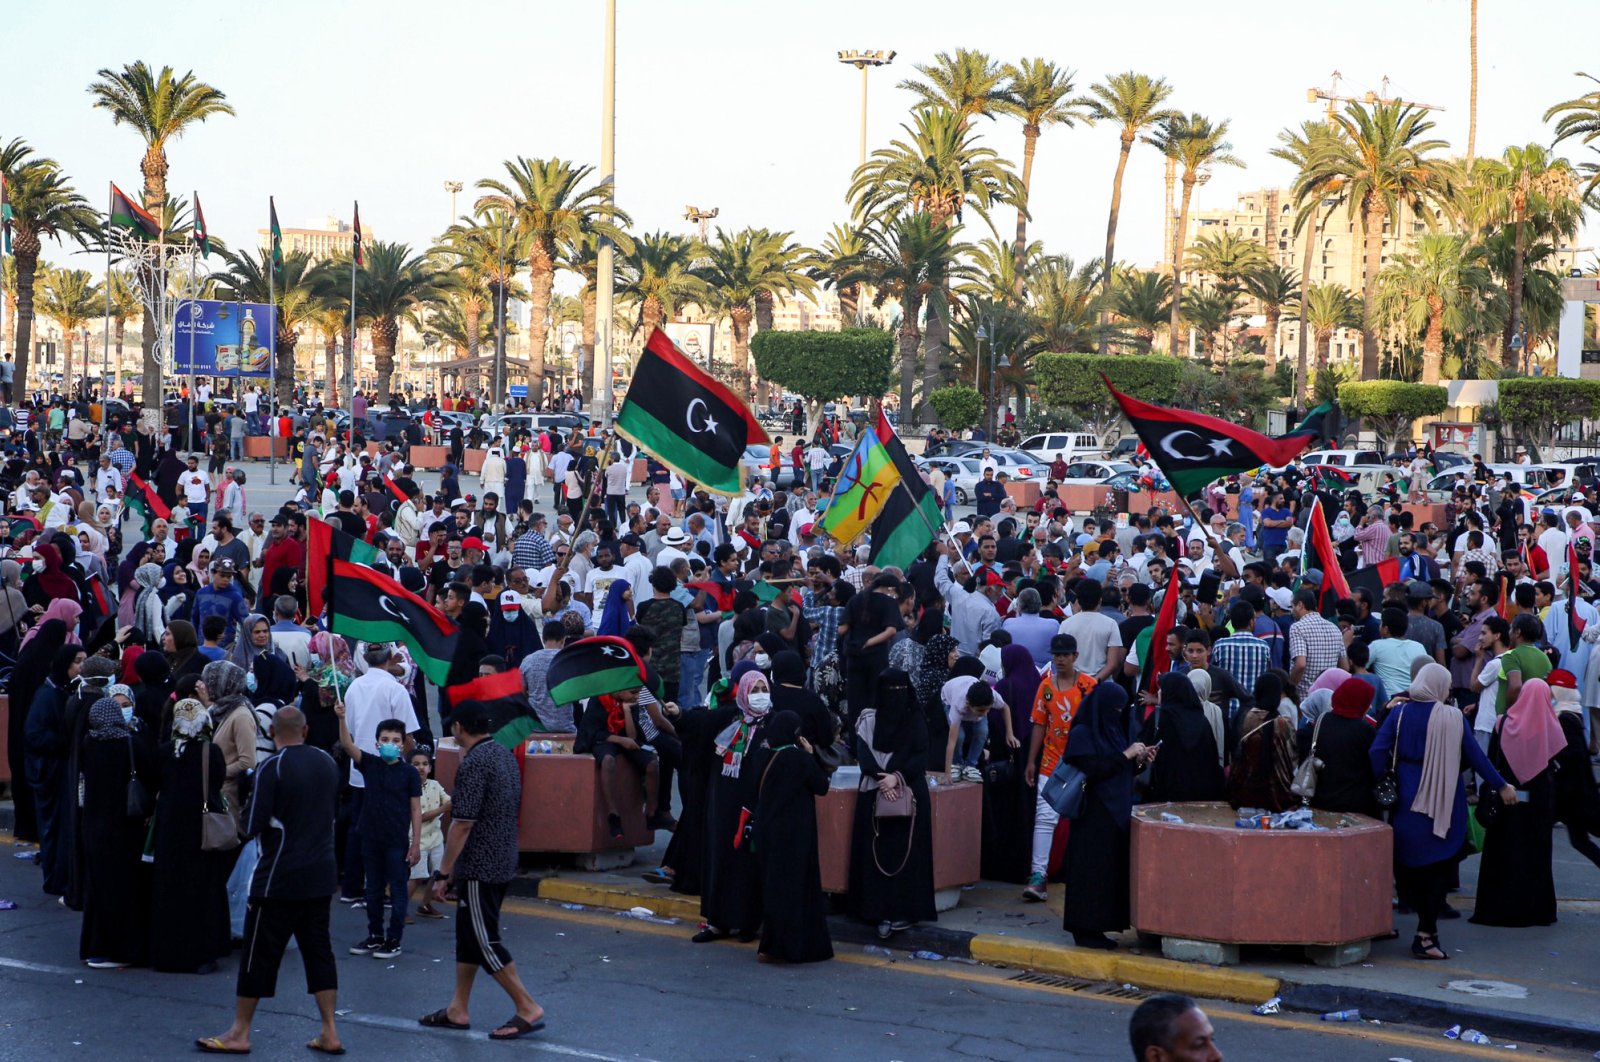 People celebrate with Libyan national flags in the capital Tripoli's Martyrs' Square, after the U.N.-recognized Government of National Accord (GNA) captured the town of Tarhuna from forces loyal to putschist Gen. Khalifa Haftar, June 5, 2020. (AFP Photo)